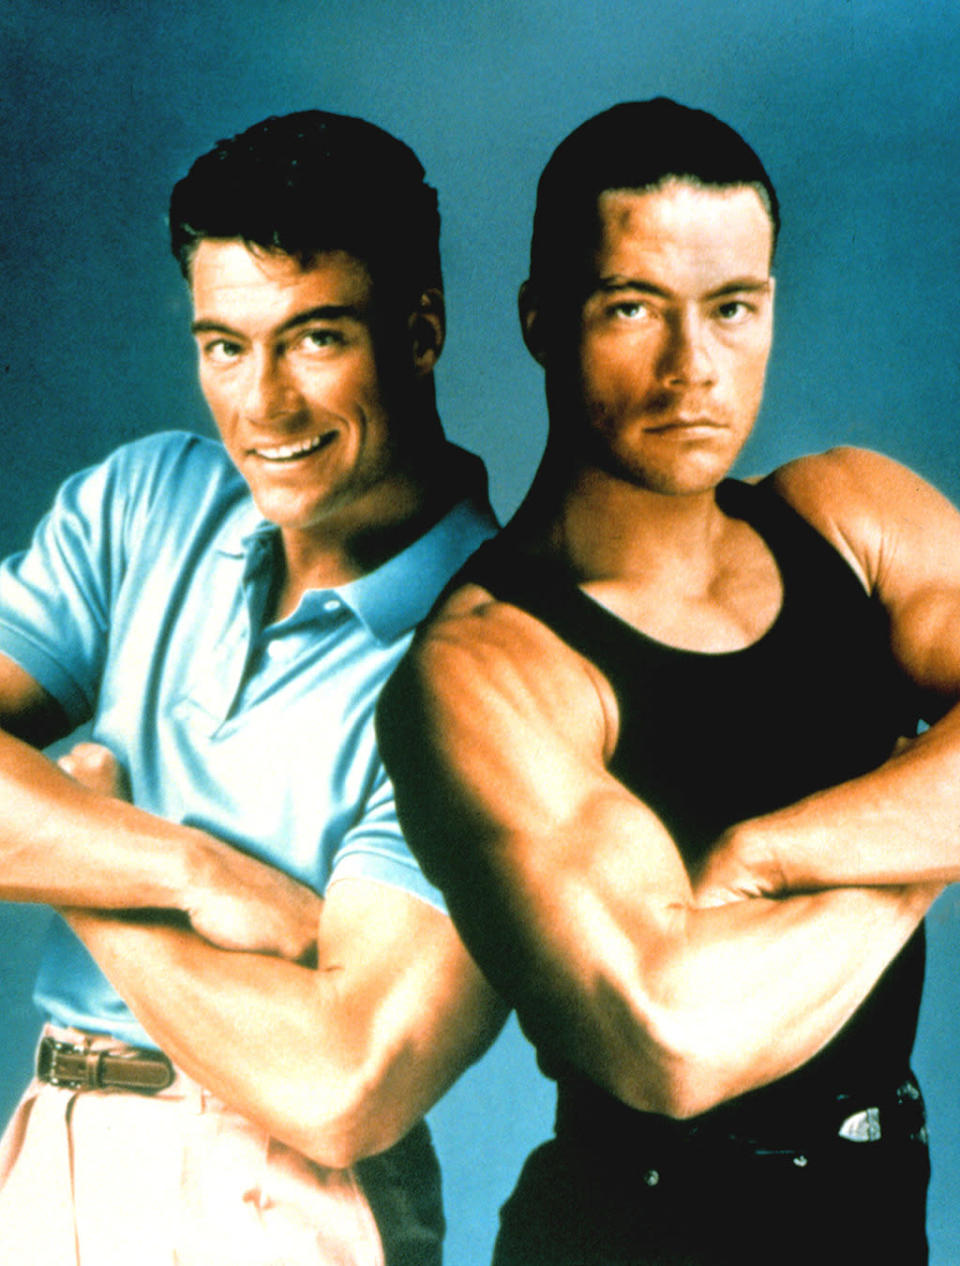 <p>Instead of twins separated at birth, Van Damme plays a set of identical siblings who part after the death of their parents in this 1991 action flick. They lead separate lives until reuniting to avenge the murder of their mother and father. <i>(Photo: Everett Collection)</i></p>